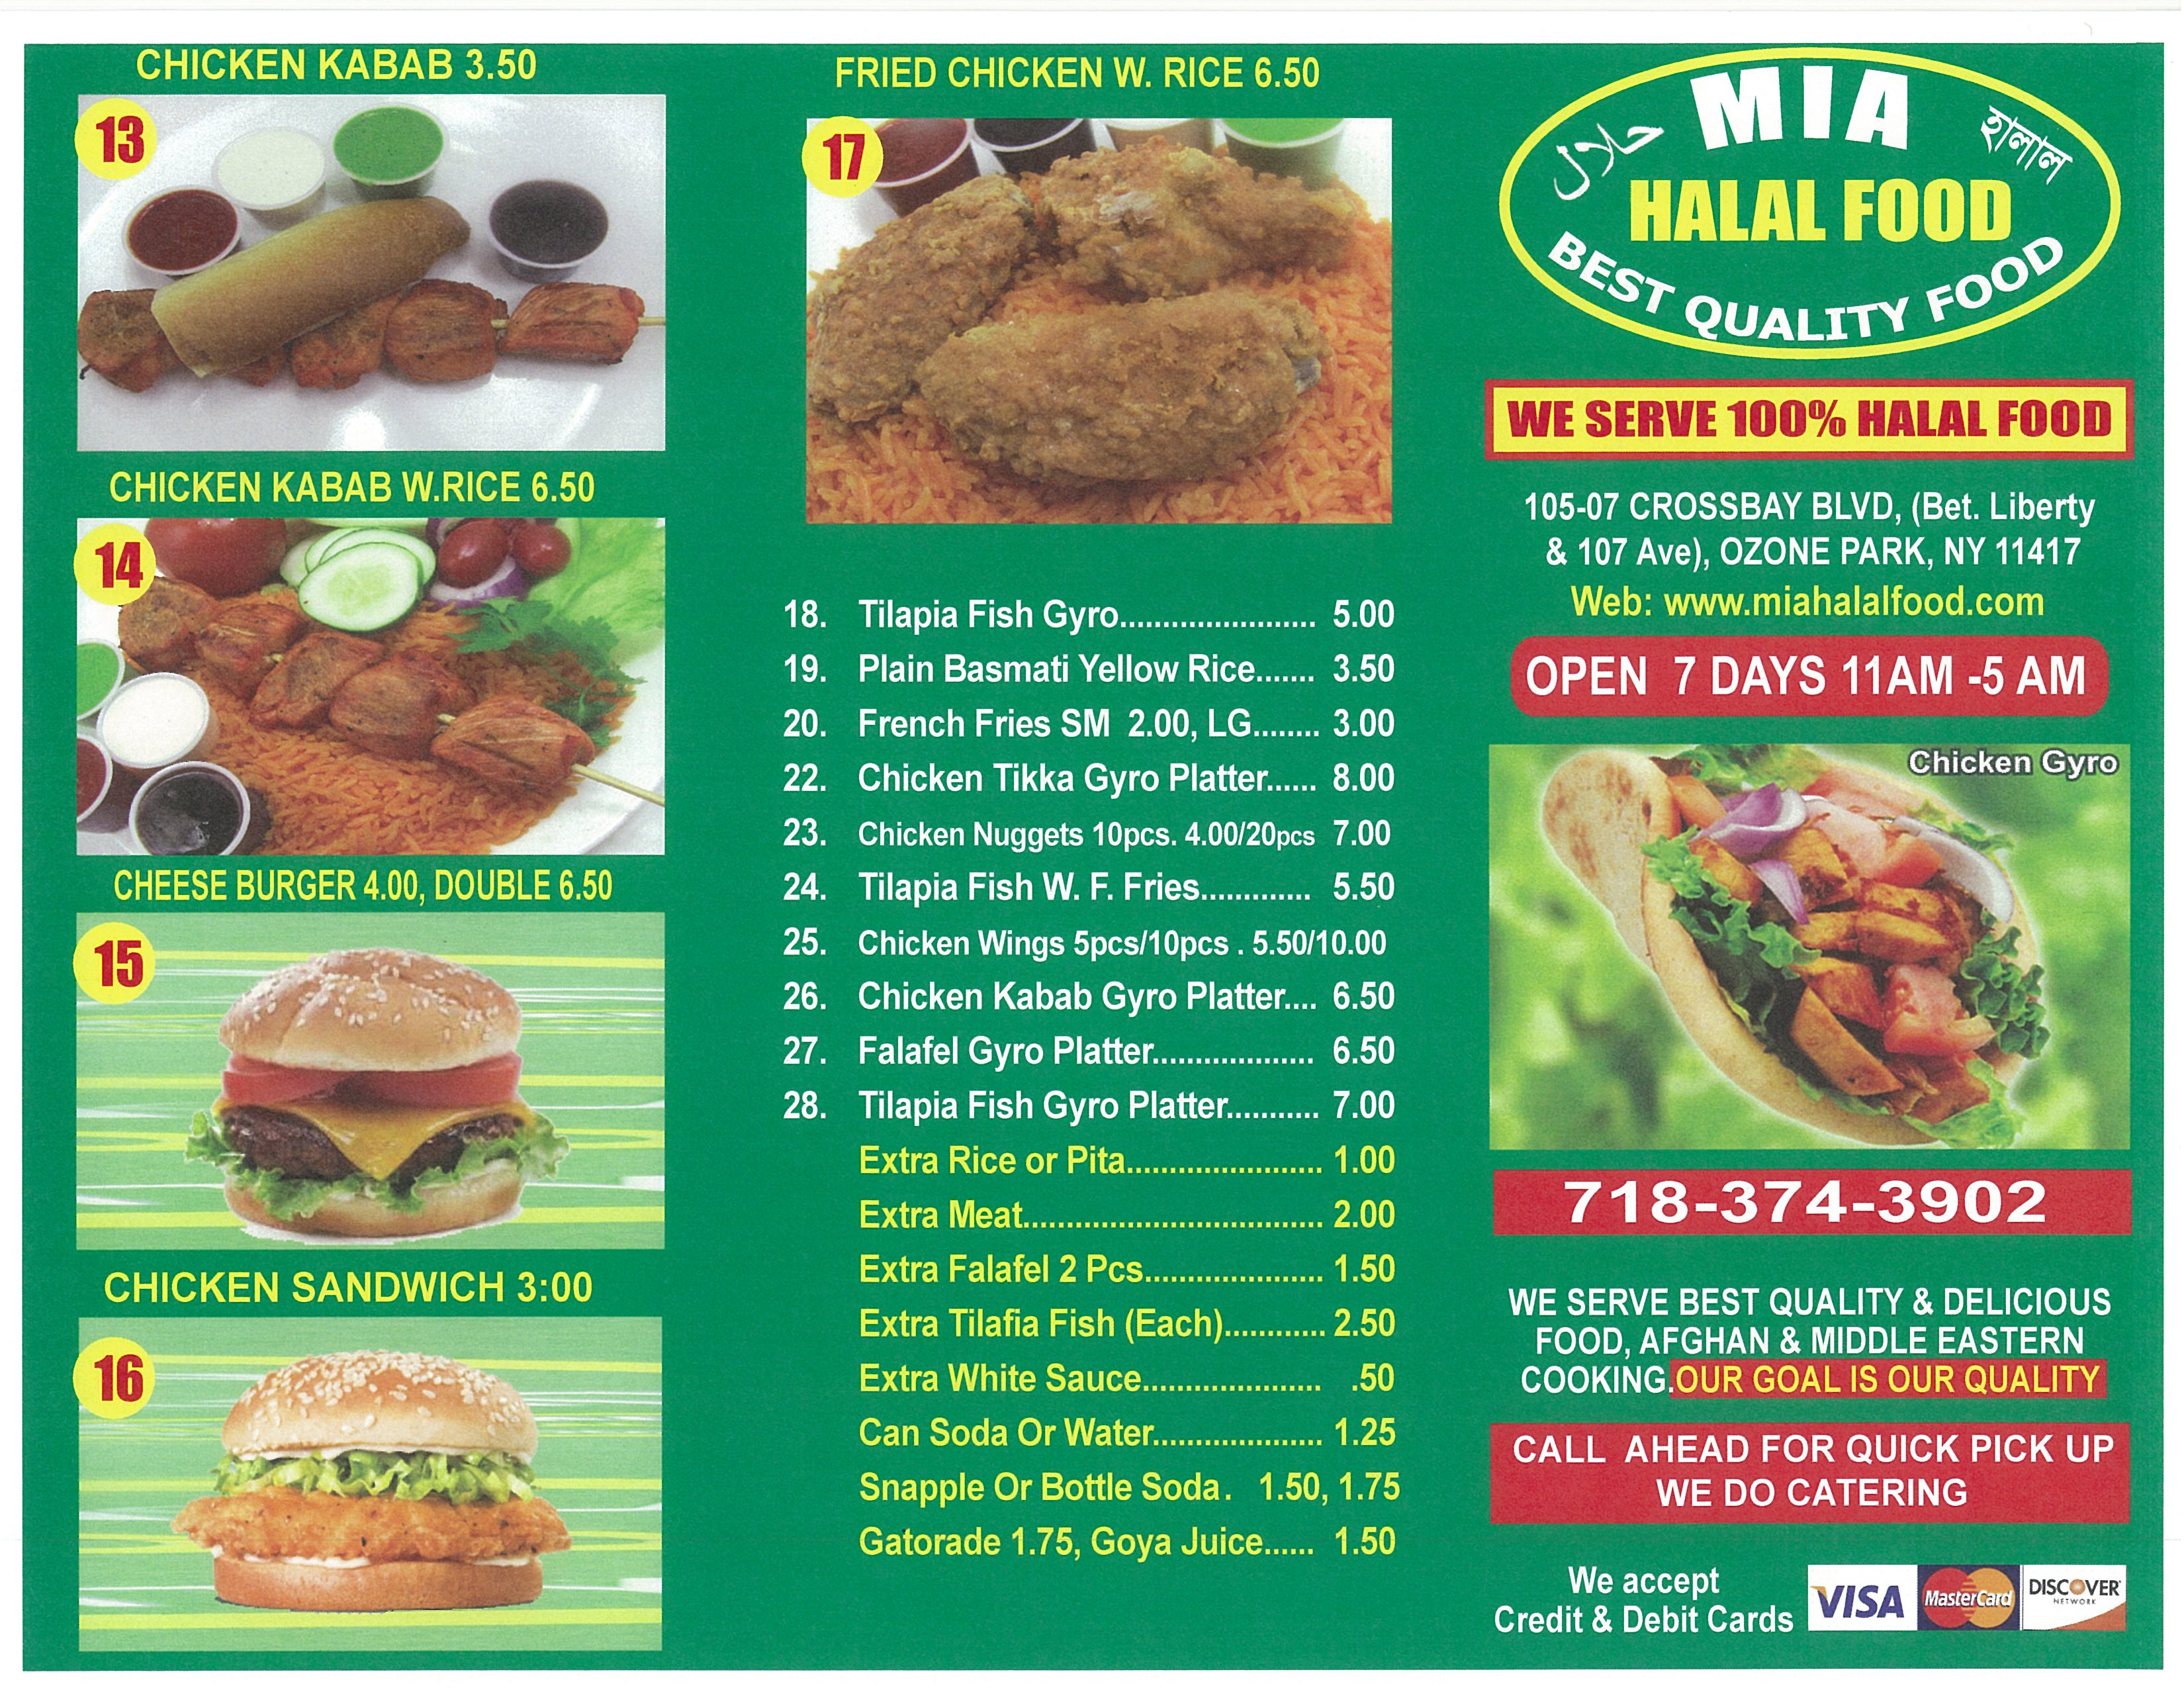 MIA HALAL FOOD Coupons near me in OZONE PARK, NY 11417 | 8coupons